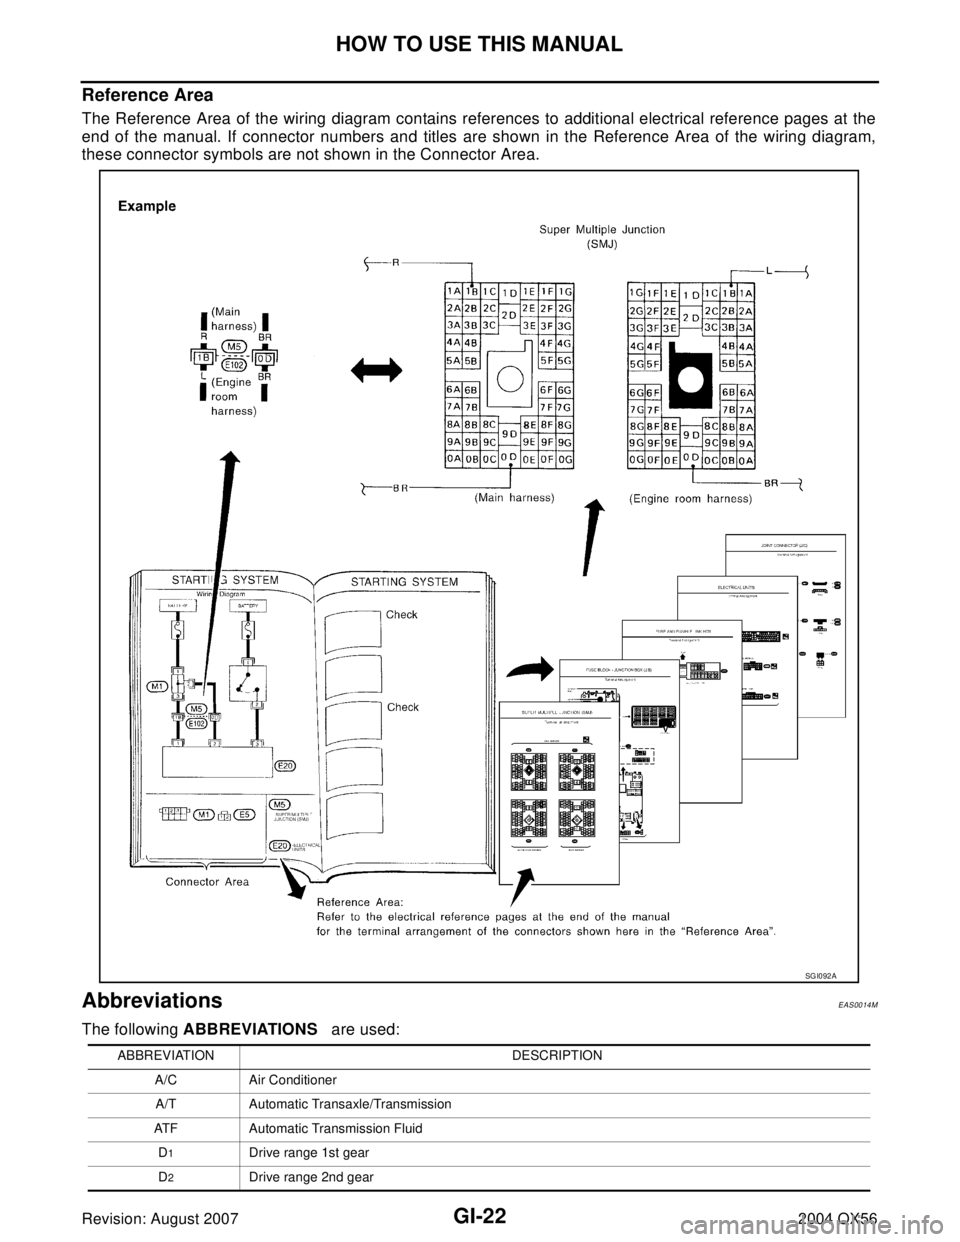 INFINITI QX56 2004  Factory Service Manual GI-22
HOW TO USE THIS MANUAL
Revision: August 20072004 QX56
Reference Area
The Reference Area of the wiring diagram contains references to additional electrical reference pages at the
end of the manua